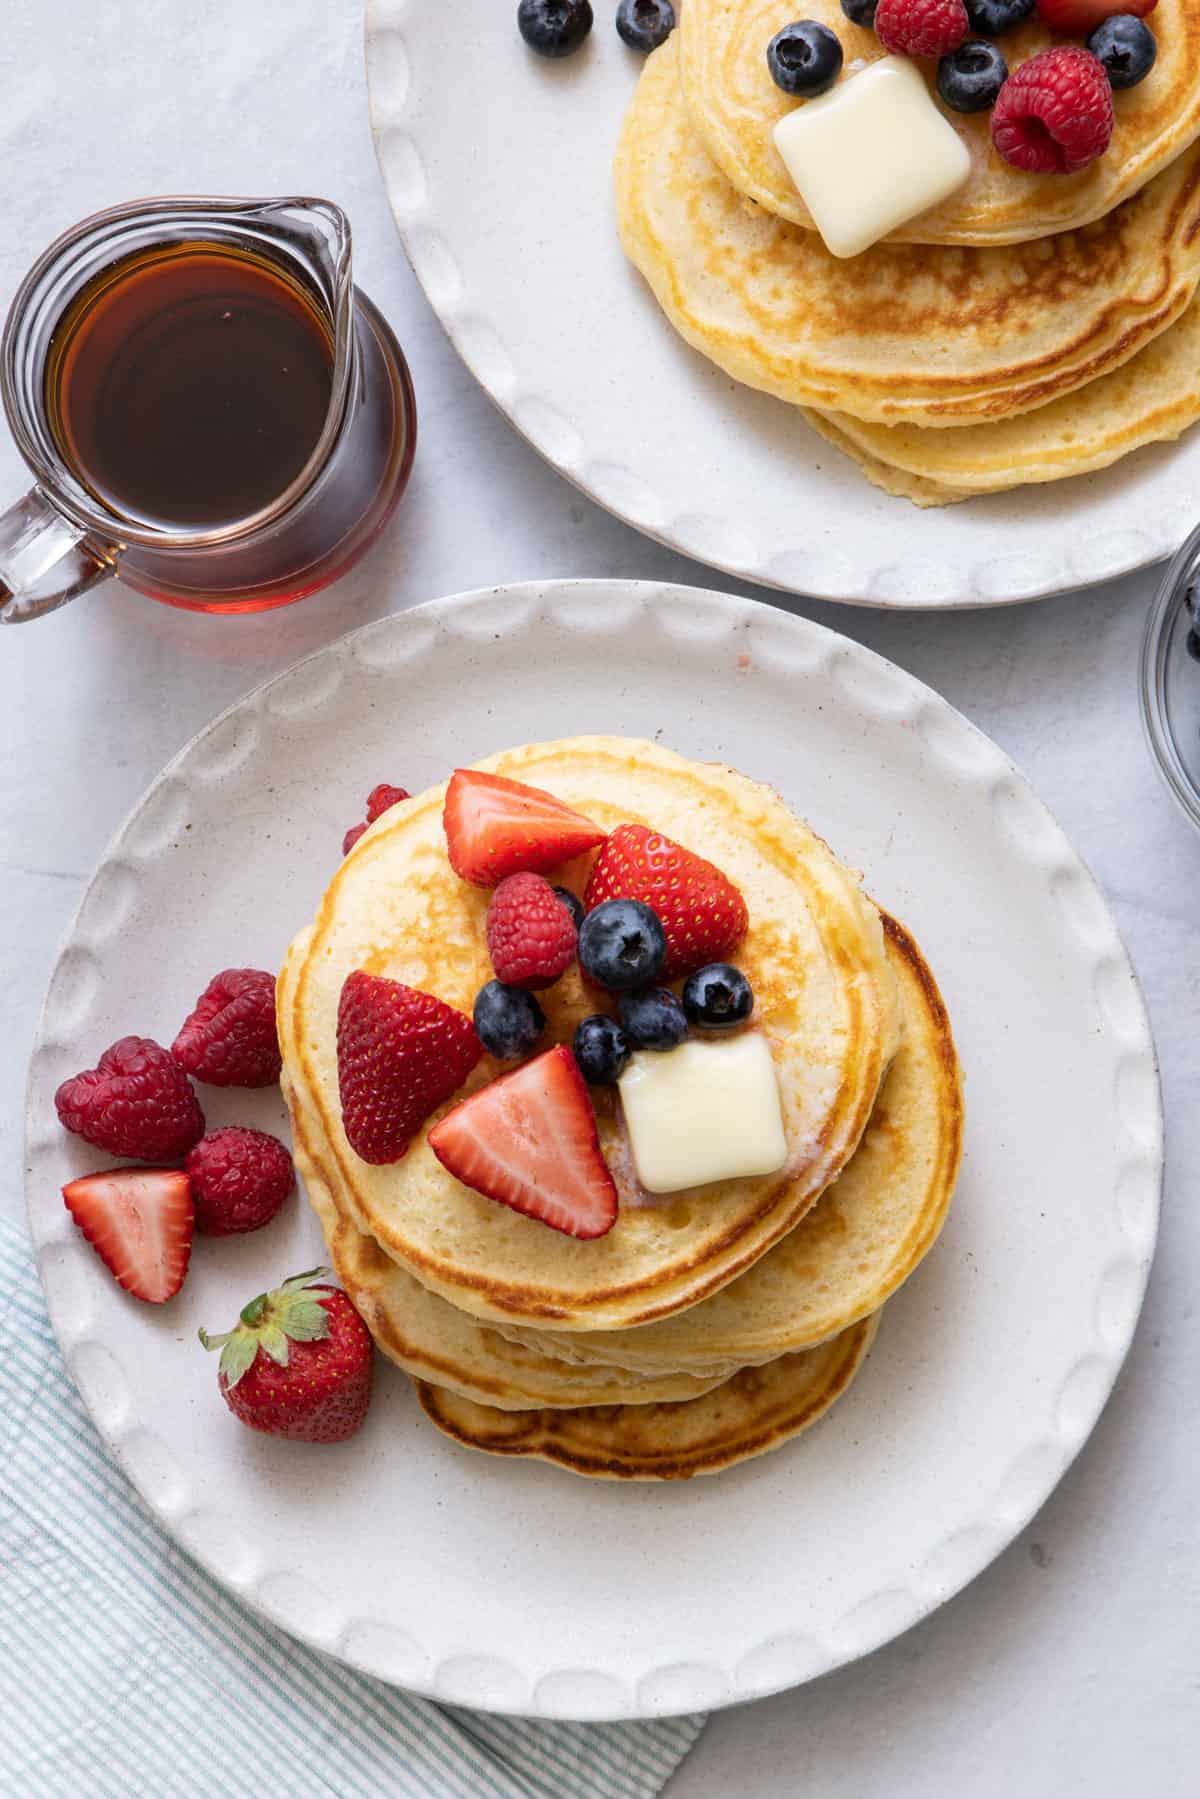 Overhead view of a stack of pancakes topped with fresh berries and butter on a large white plate with a side of maple syrup in glass carafe for pouring.